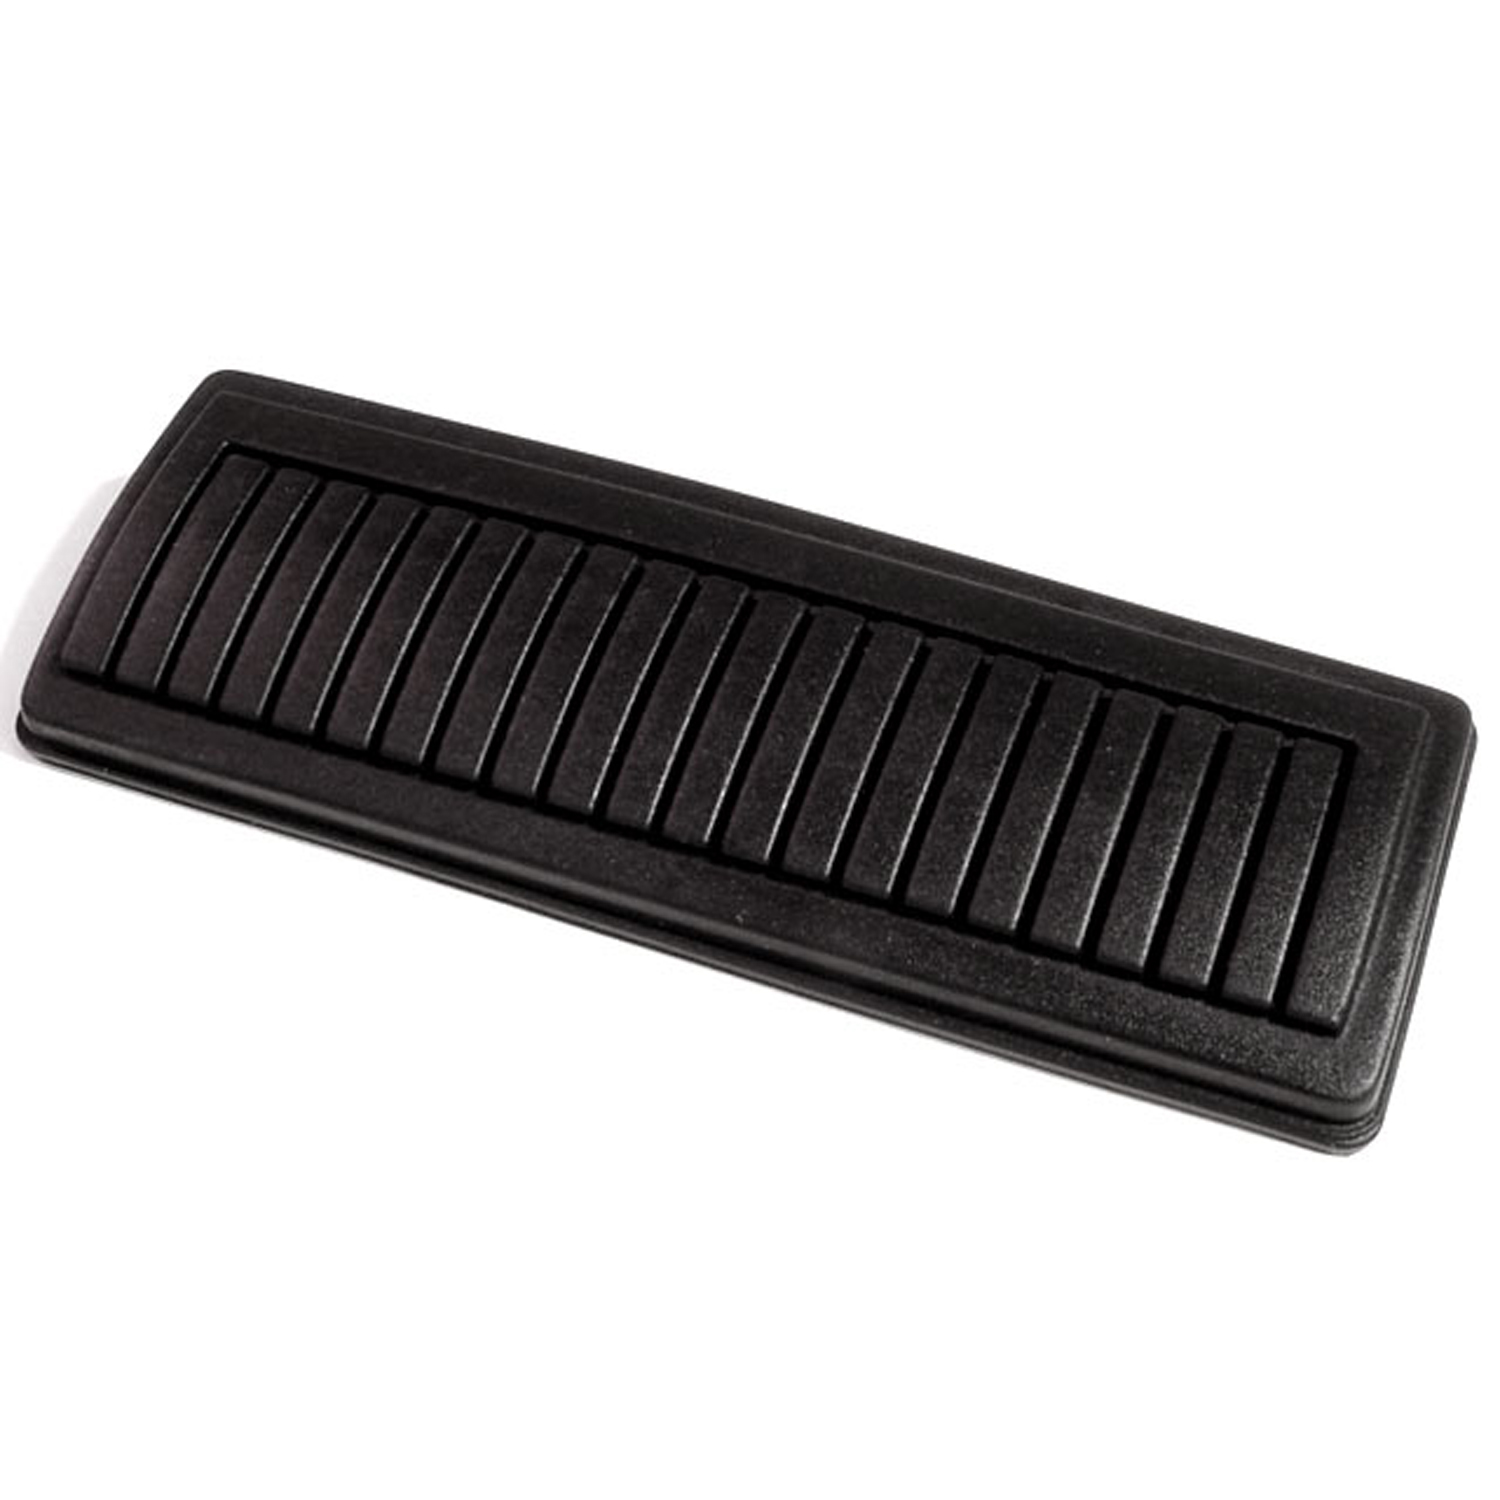 1966 Dodge Coronet Brake Pedal Pad, for models with automatic transmission-CB 200